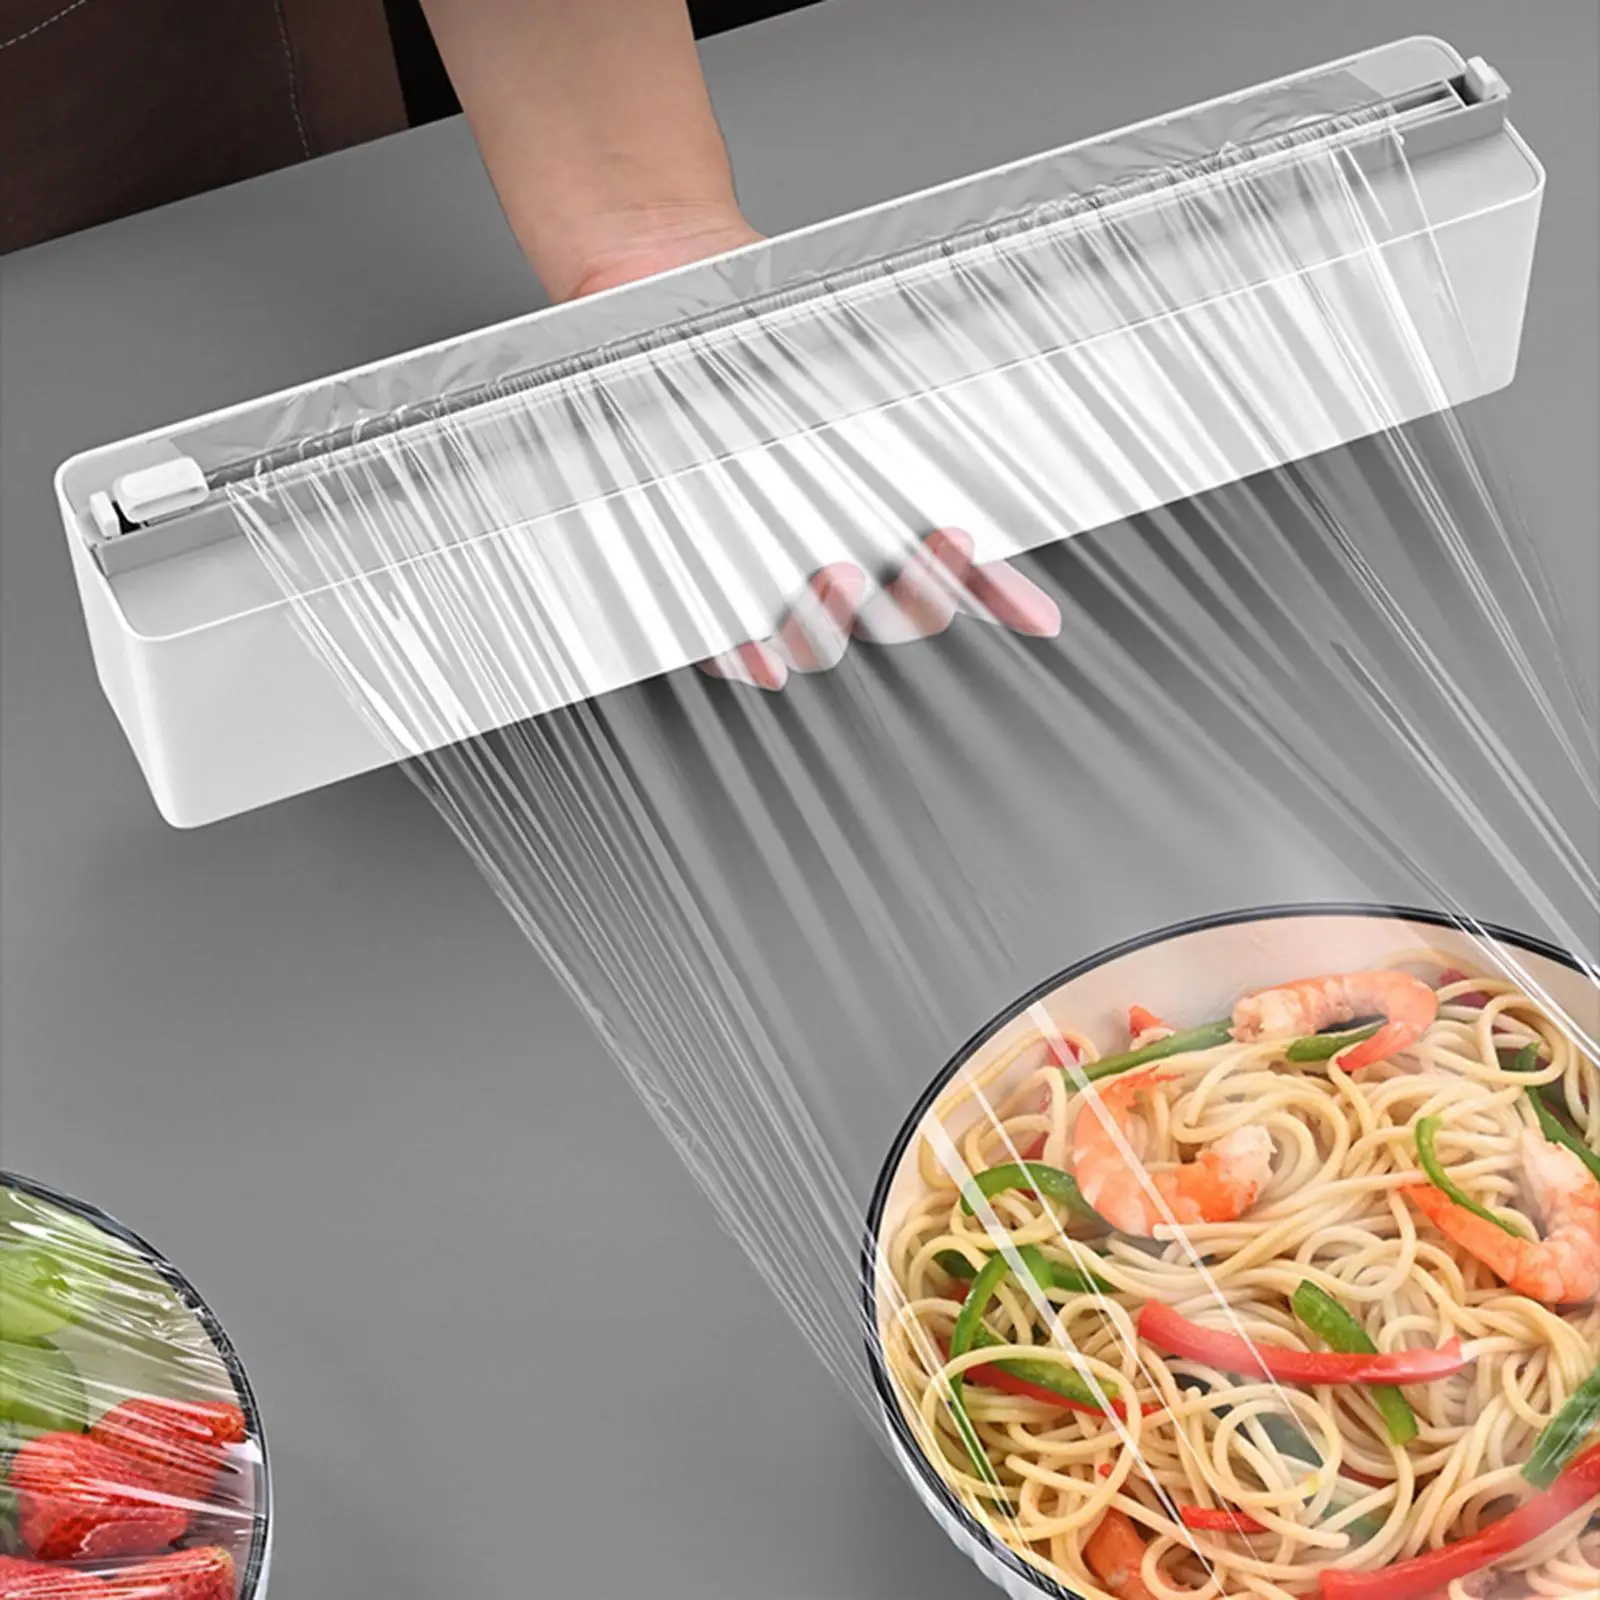 Refillable Cling Film Cutting Box Safety Household Food Wrap Dispenser for Home